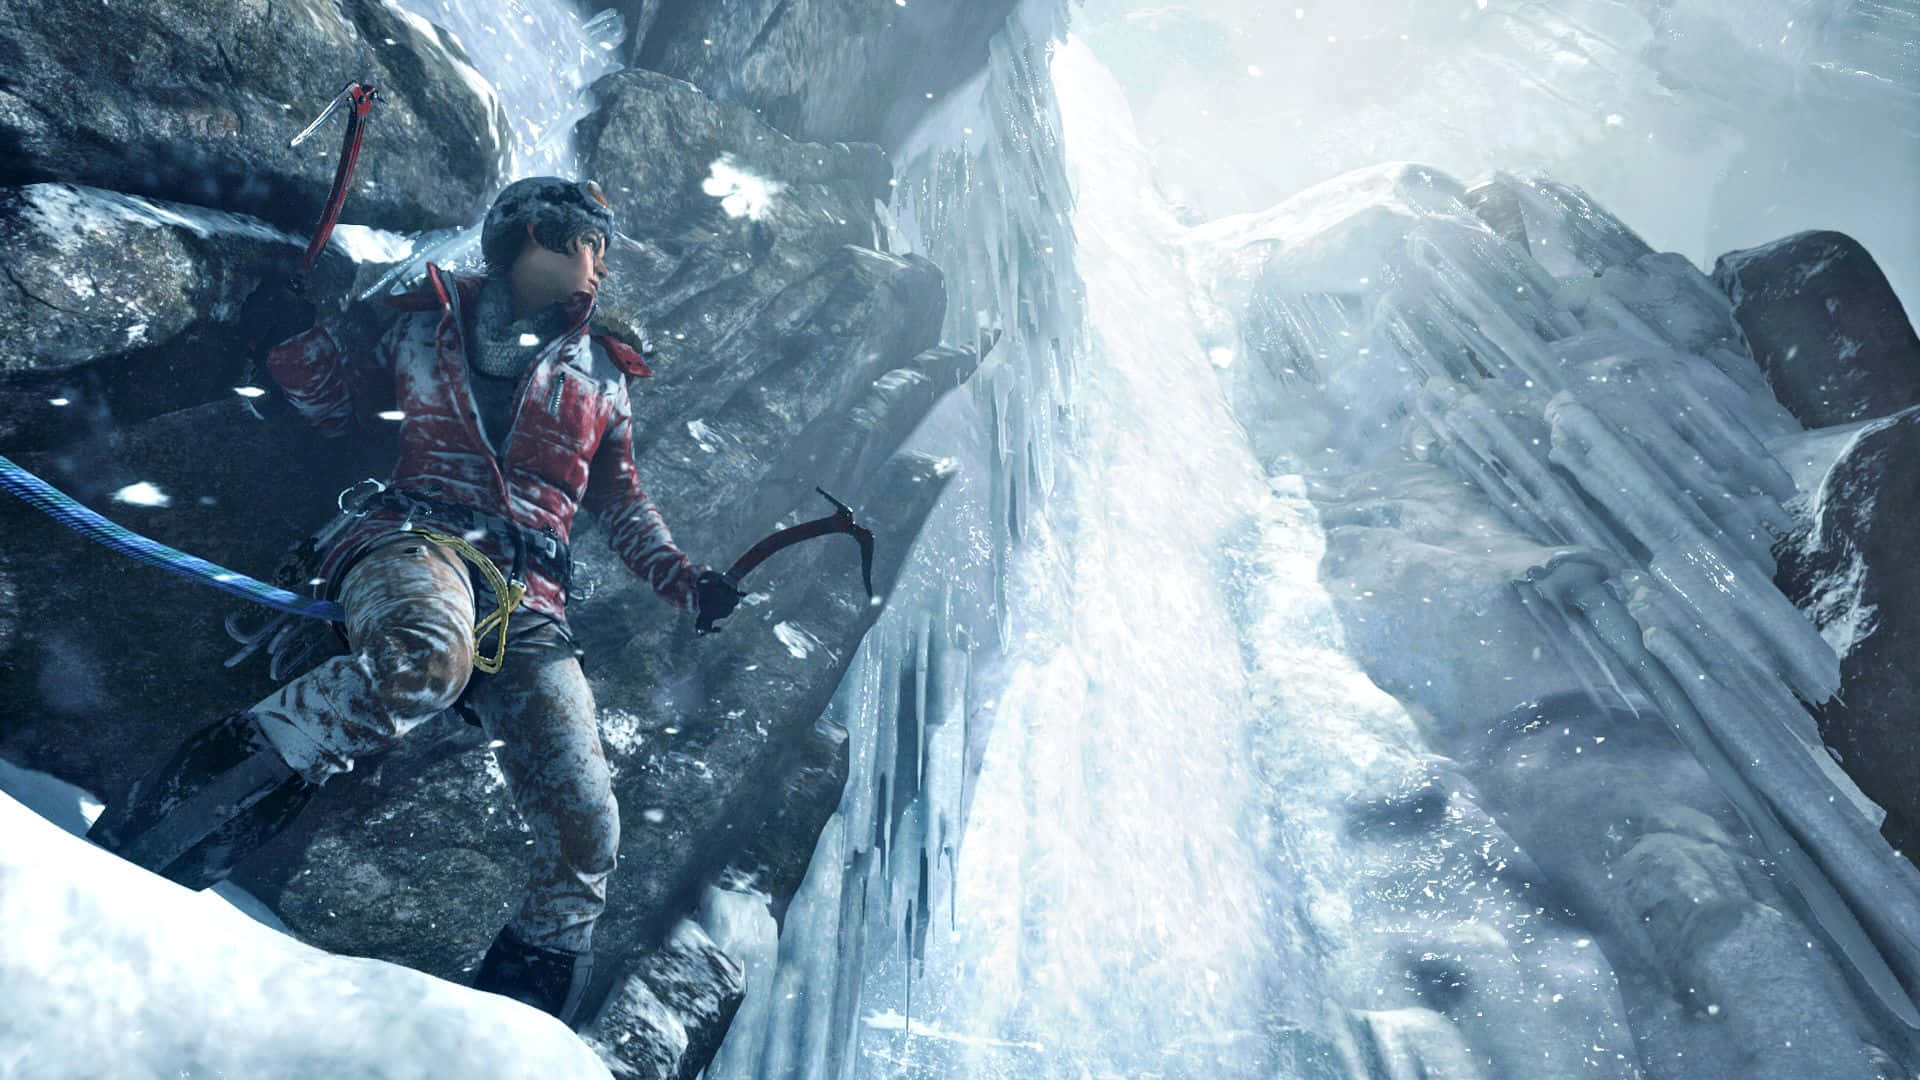 Rise Of The Tomb Raider - An Intense and Action Packed Adventure